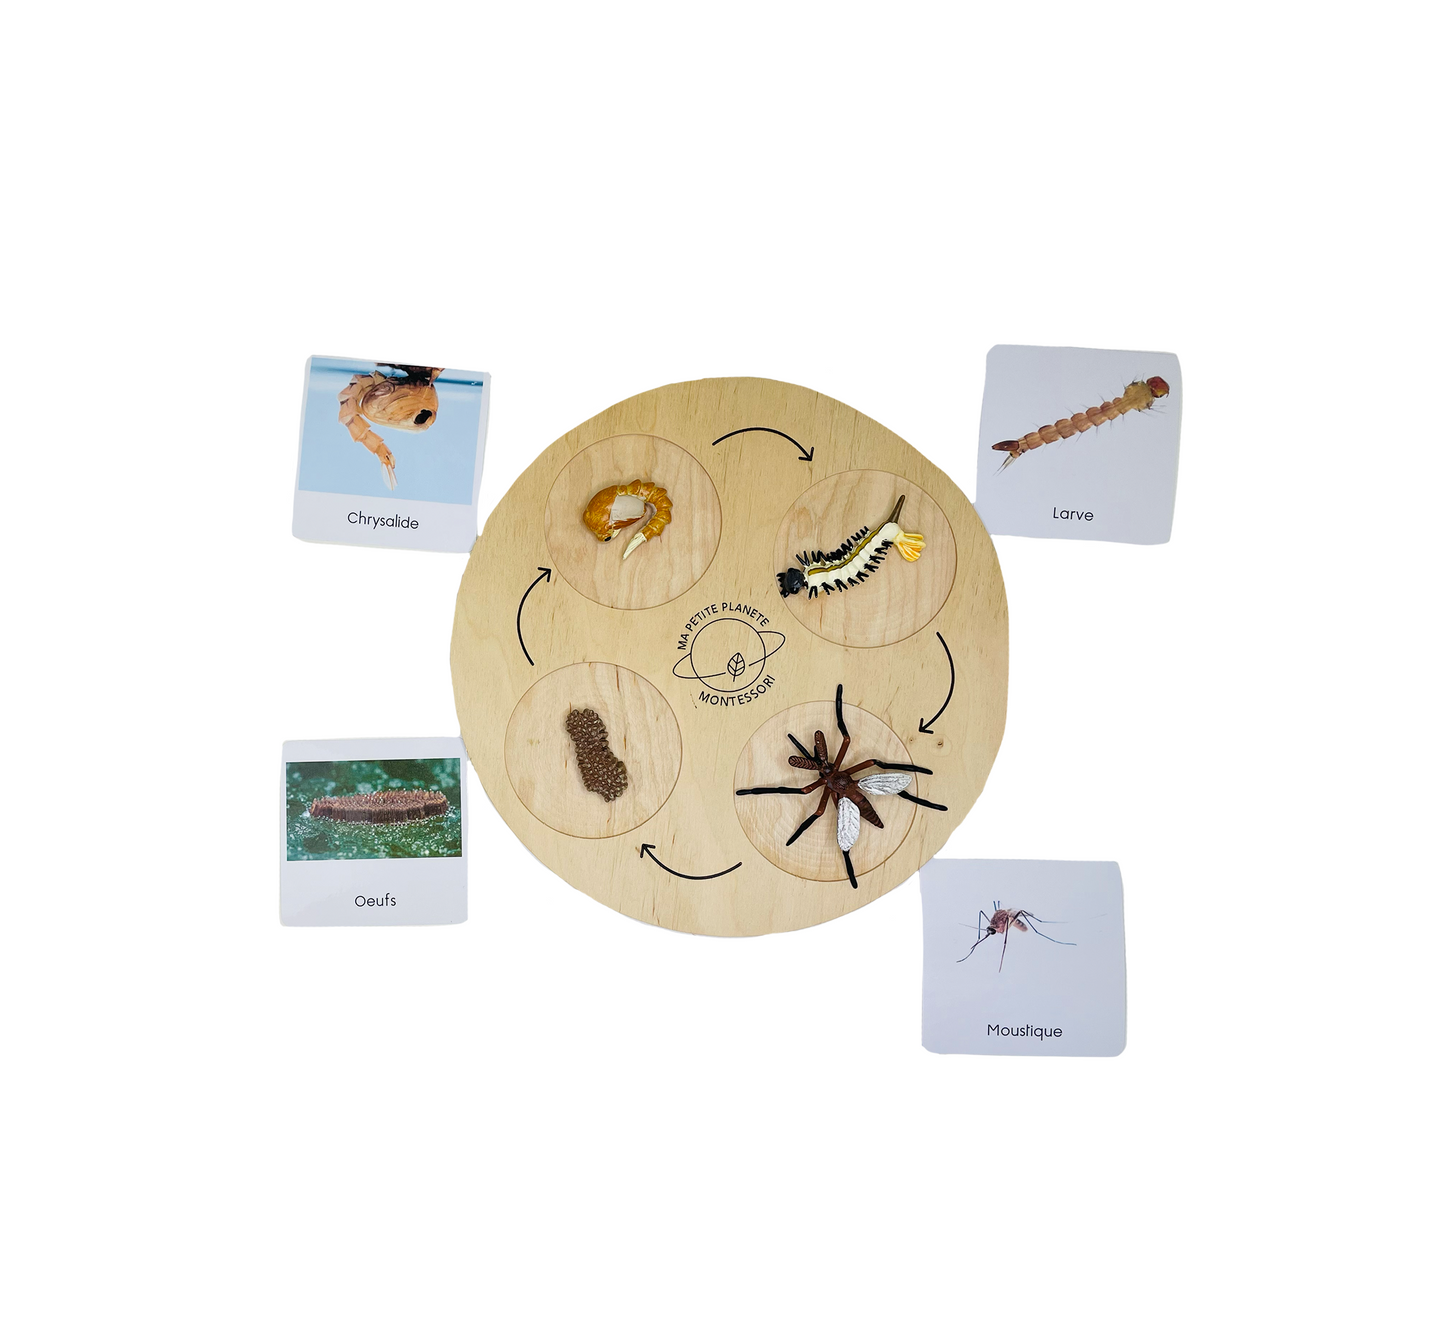 Life cycle of a mosquito figurine set